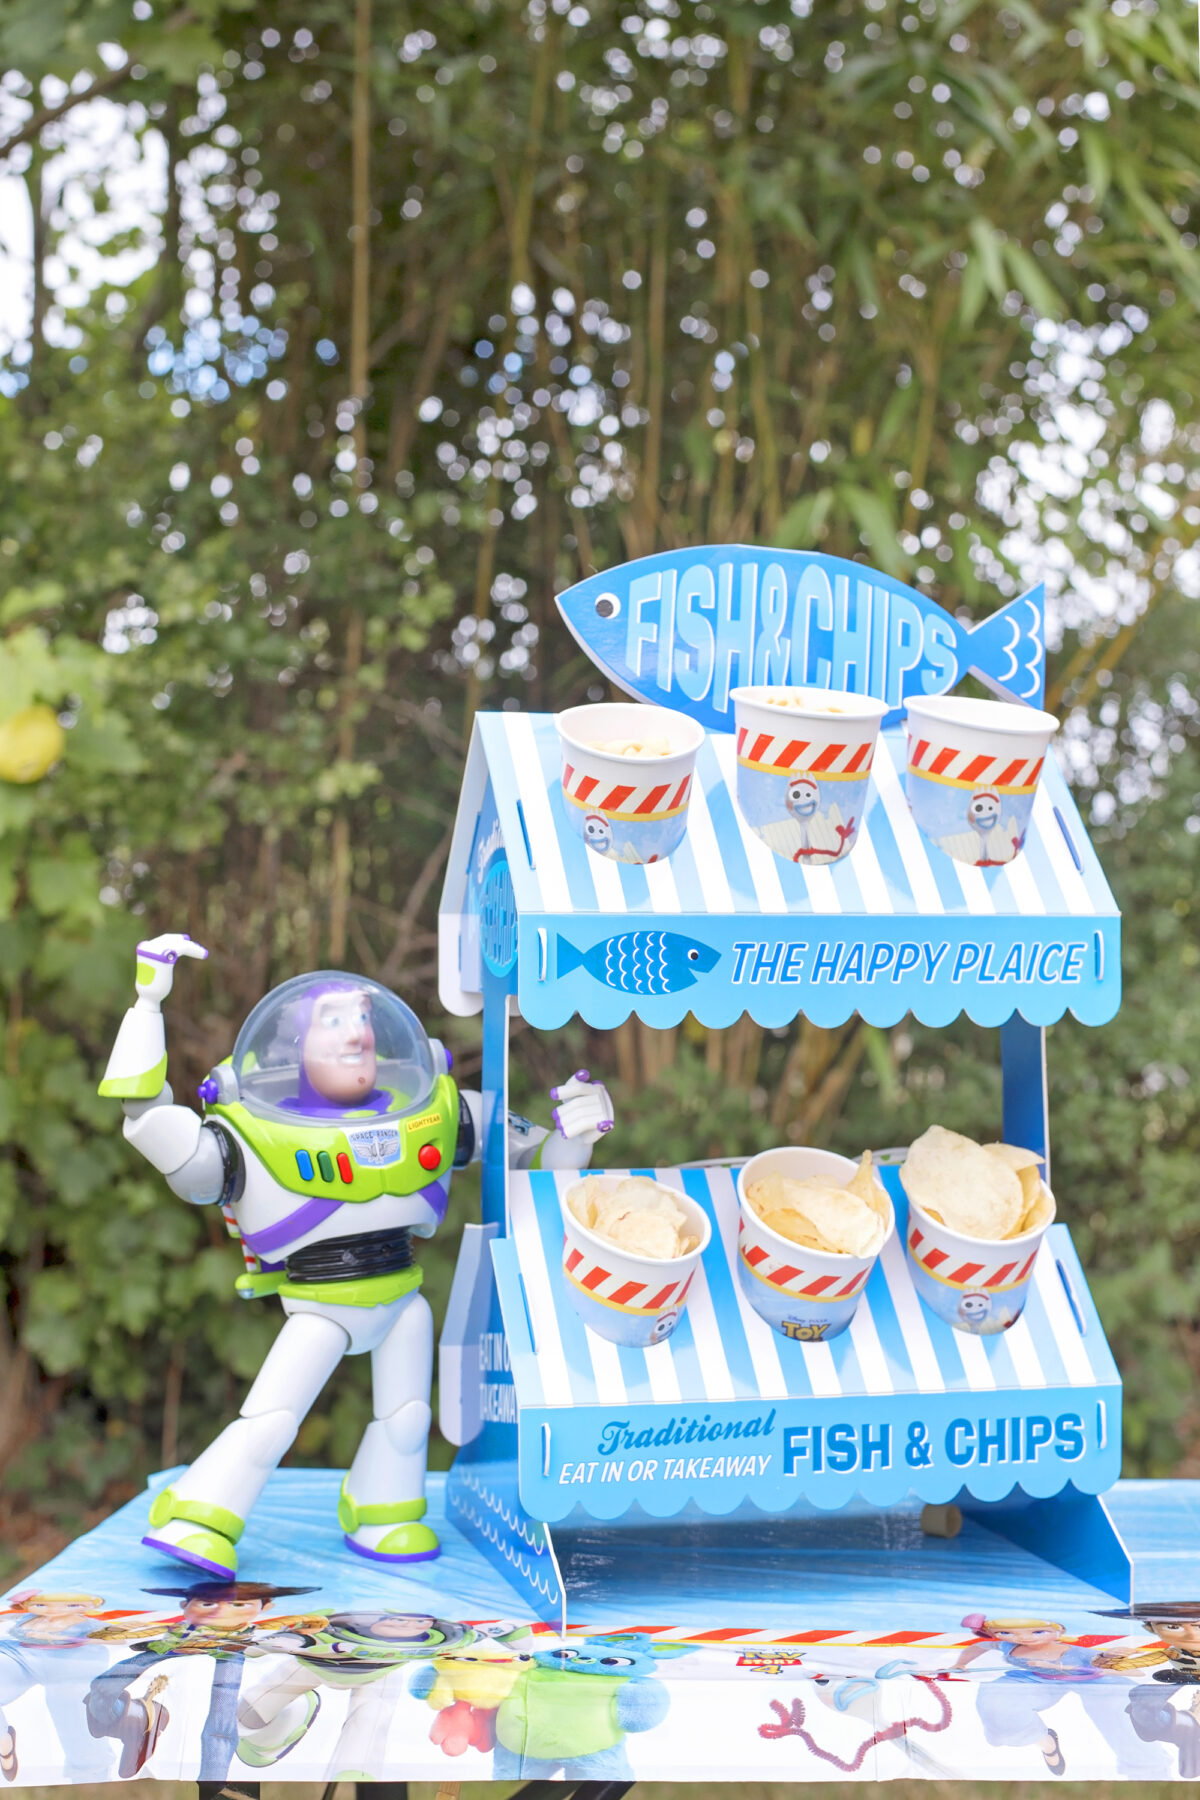 Image shows a party table outdoors with Disney's Buzz Lightyear toy stood on top of it, next to a novelty fish and chip stand made from cardboard.  